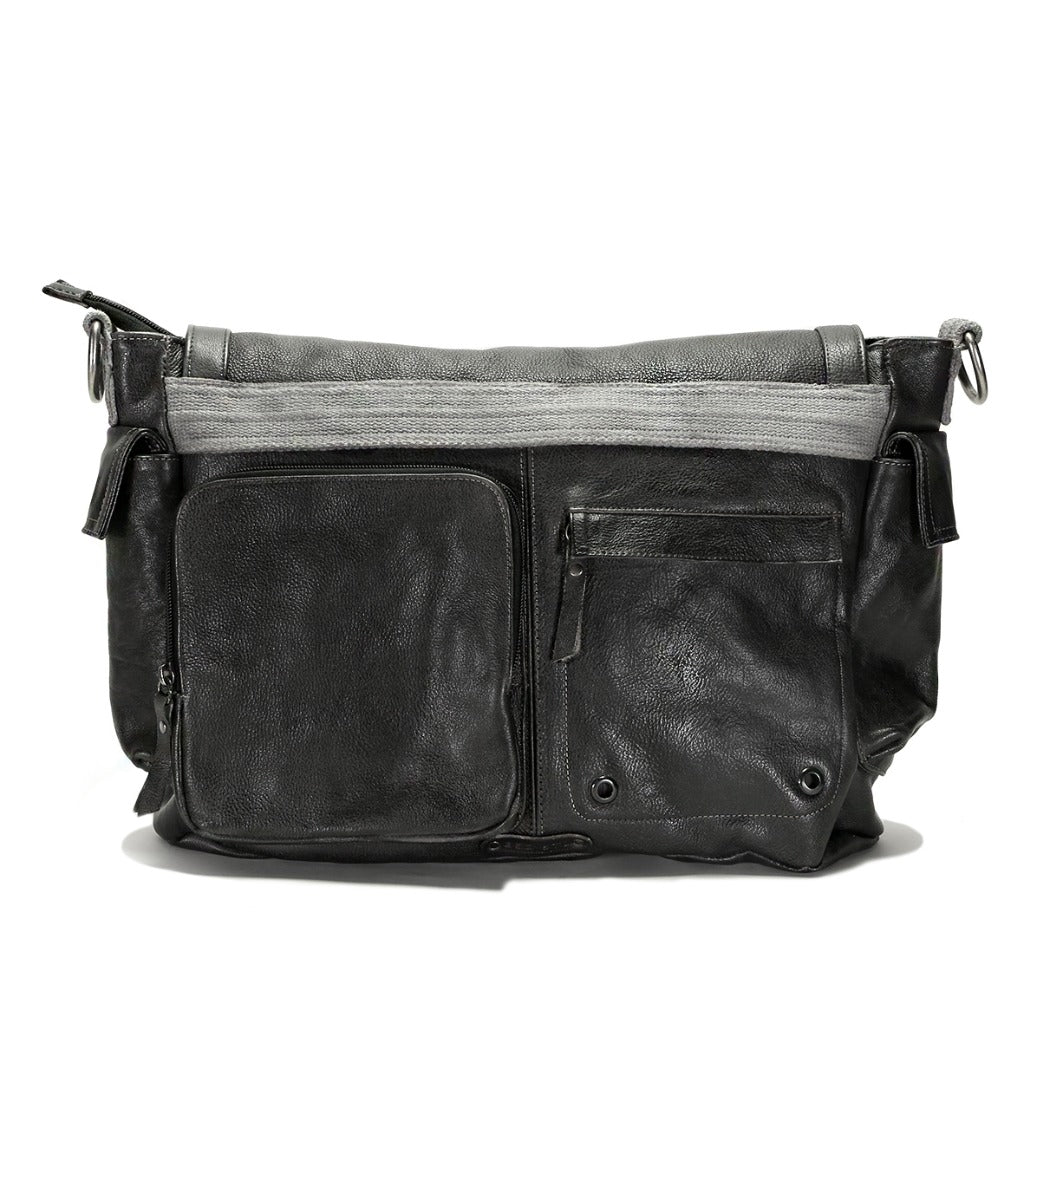 A black leather Hawkeye II bag with two compartments by Bed Stu.